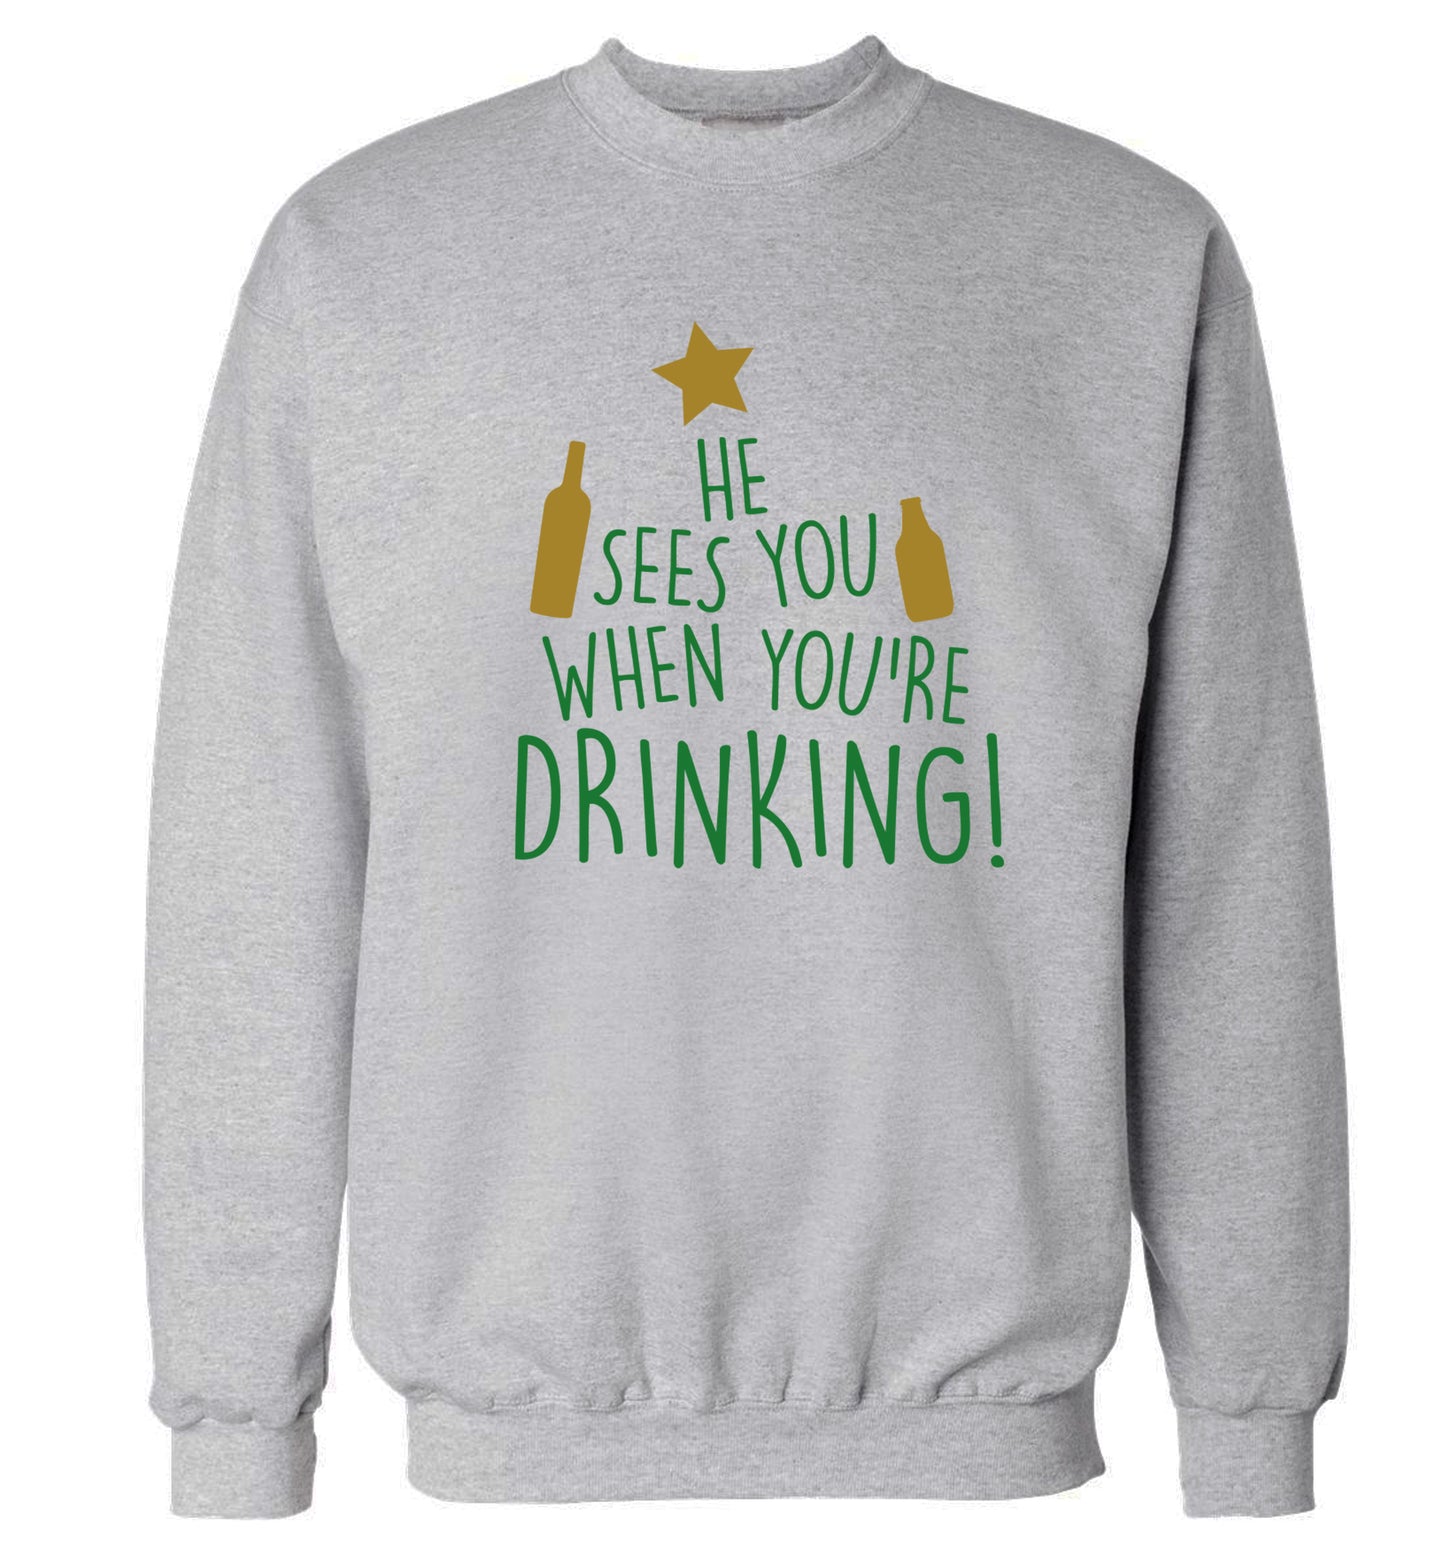 He sees you when you're drinking Adult's unisex grey Sweater 2XL